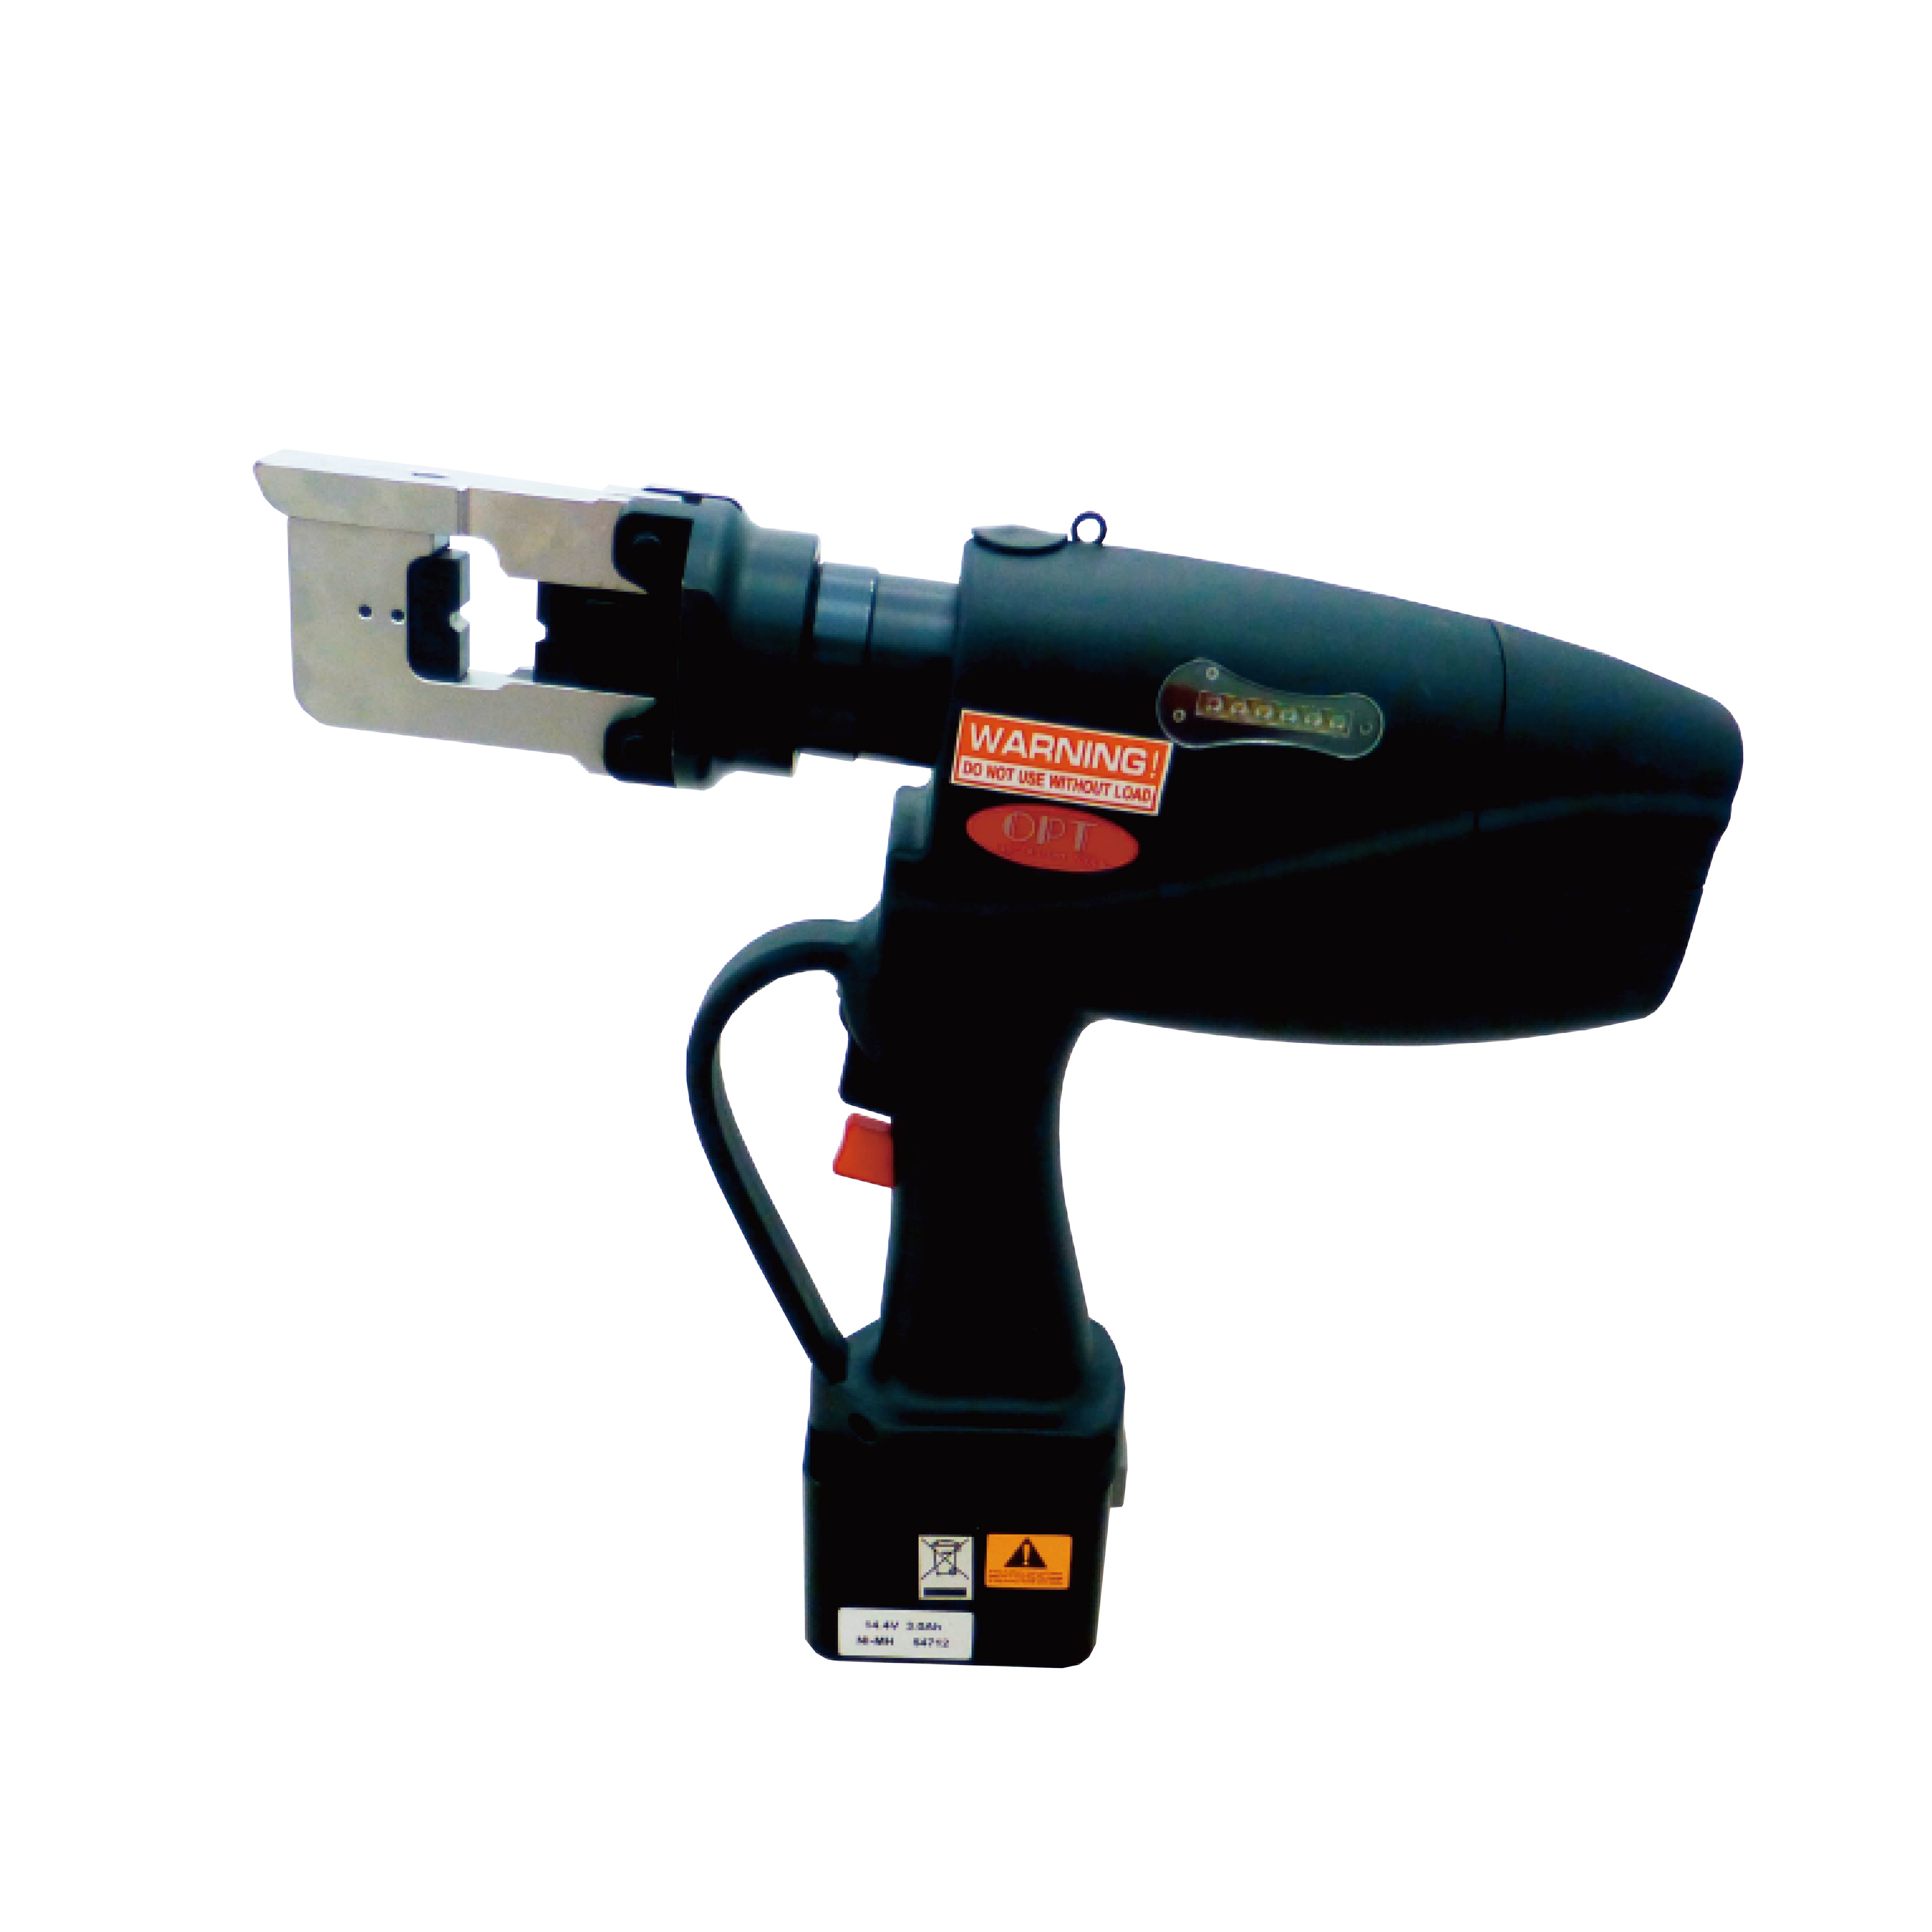 EPL-185 CORDLESS HYDRAULIC CRIMPING TOOLS-EPL-185